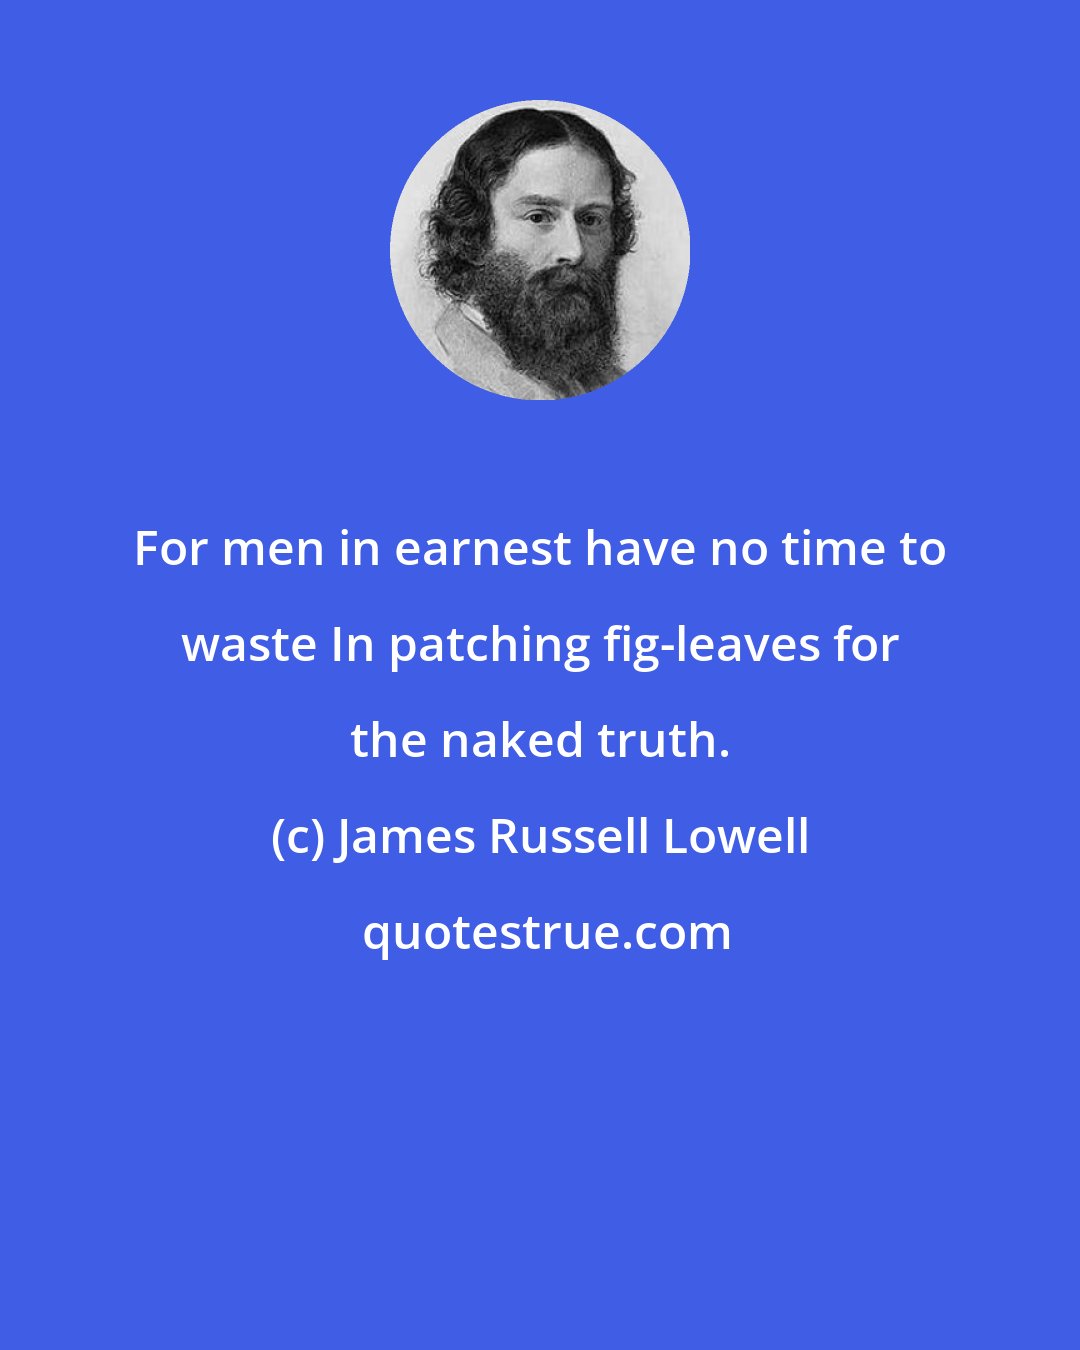 James Russell Lowell: For men in earnest have no time to waste In patching fig-leaves for the naked truth.